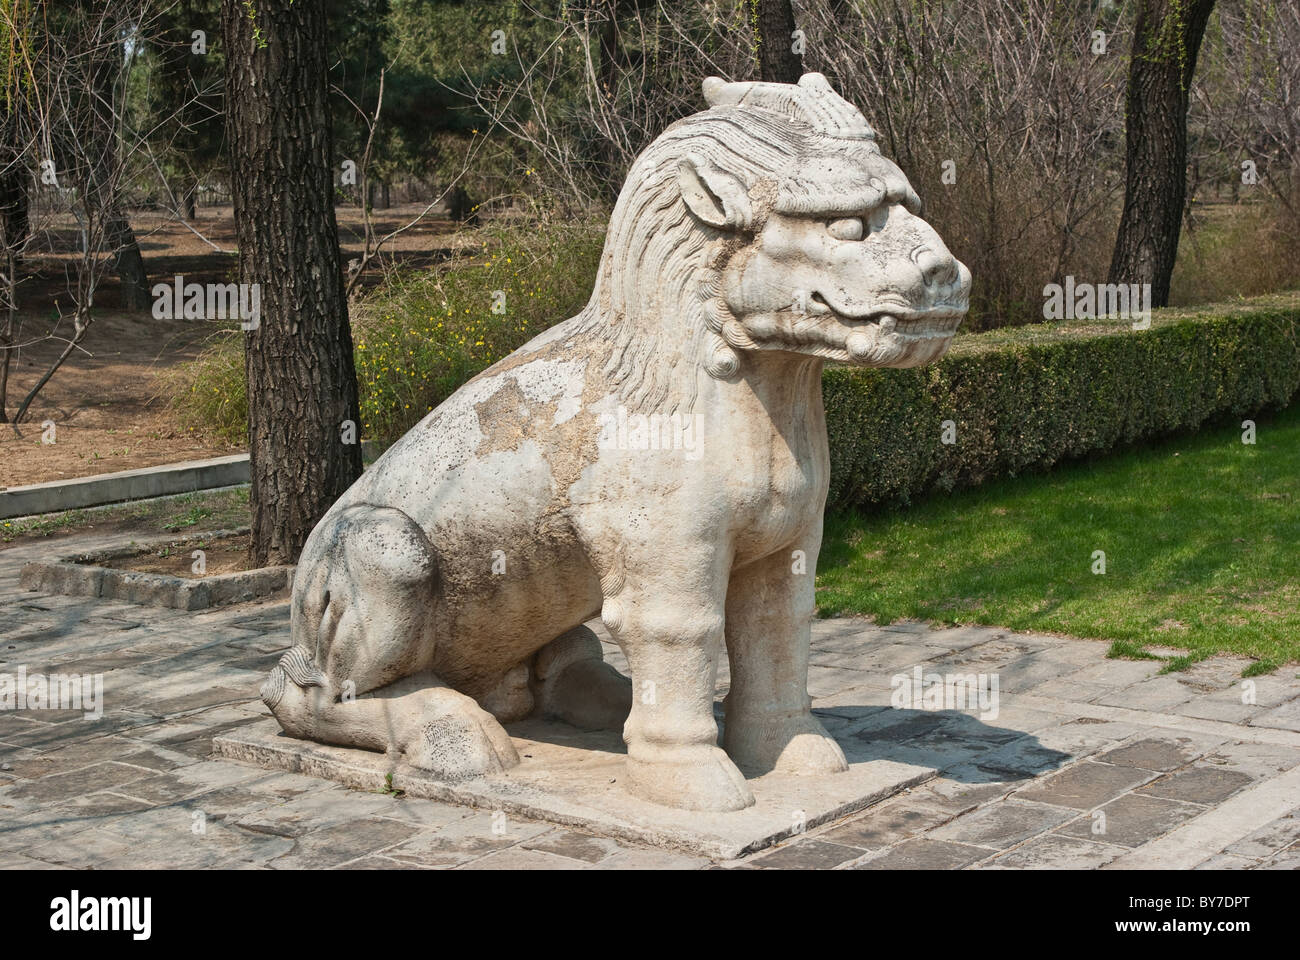 Asia, China, Beijing, Changping. Oversize sculpture of a mythical qilin; one of 36 figures on the Sacred Way at Ming Tombs. Stock Photo